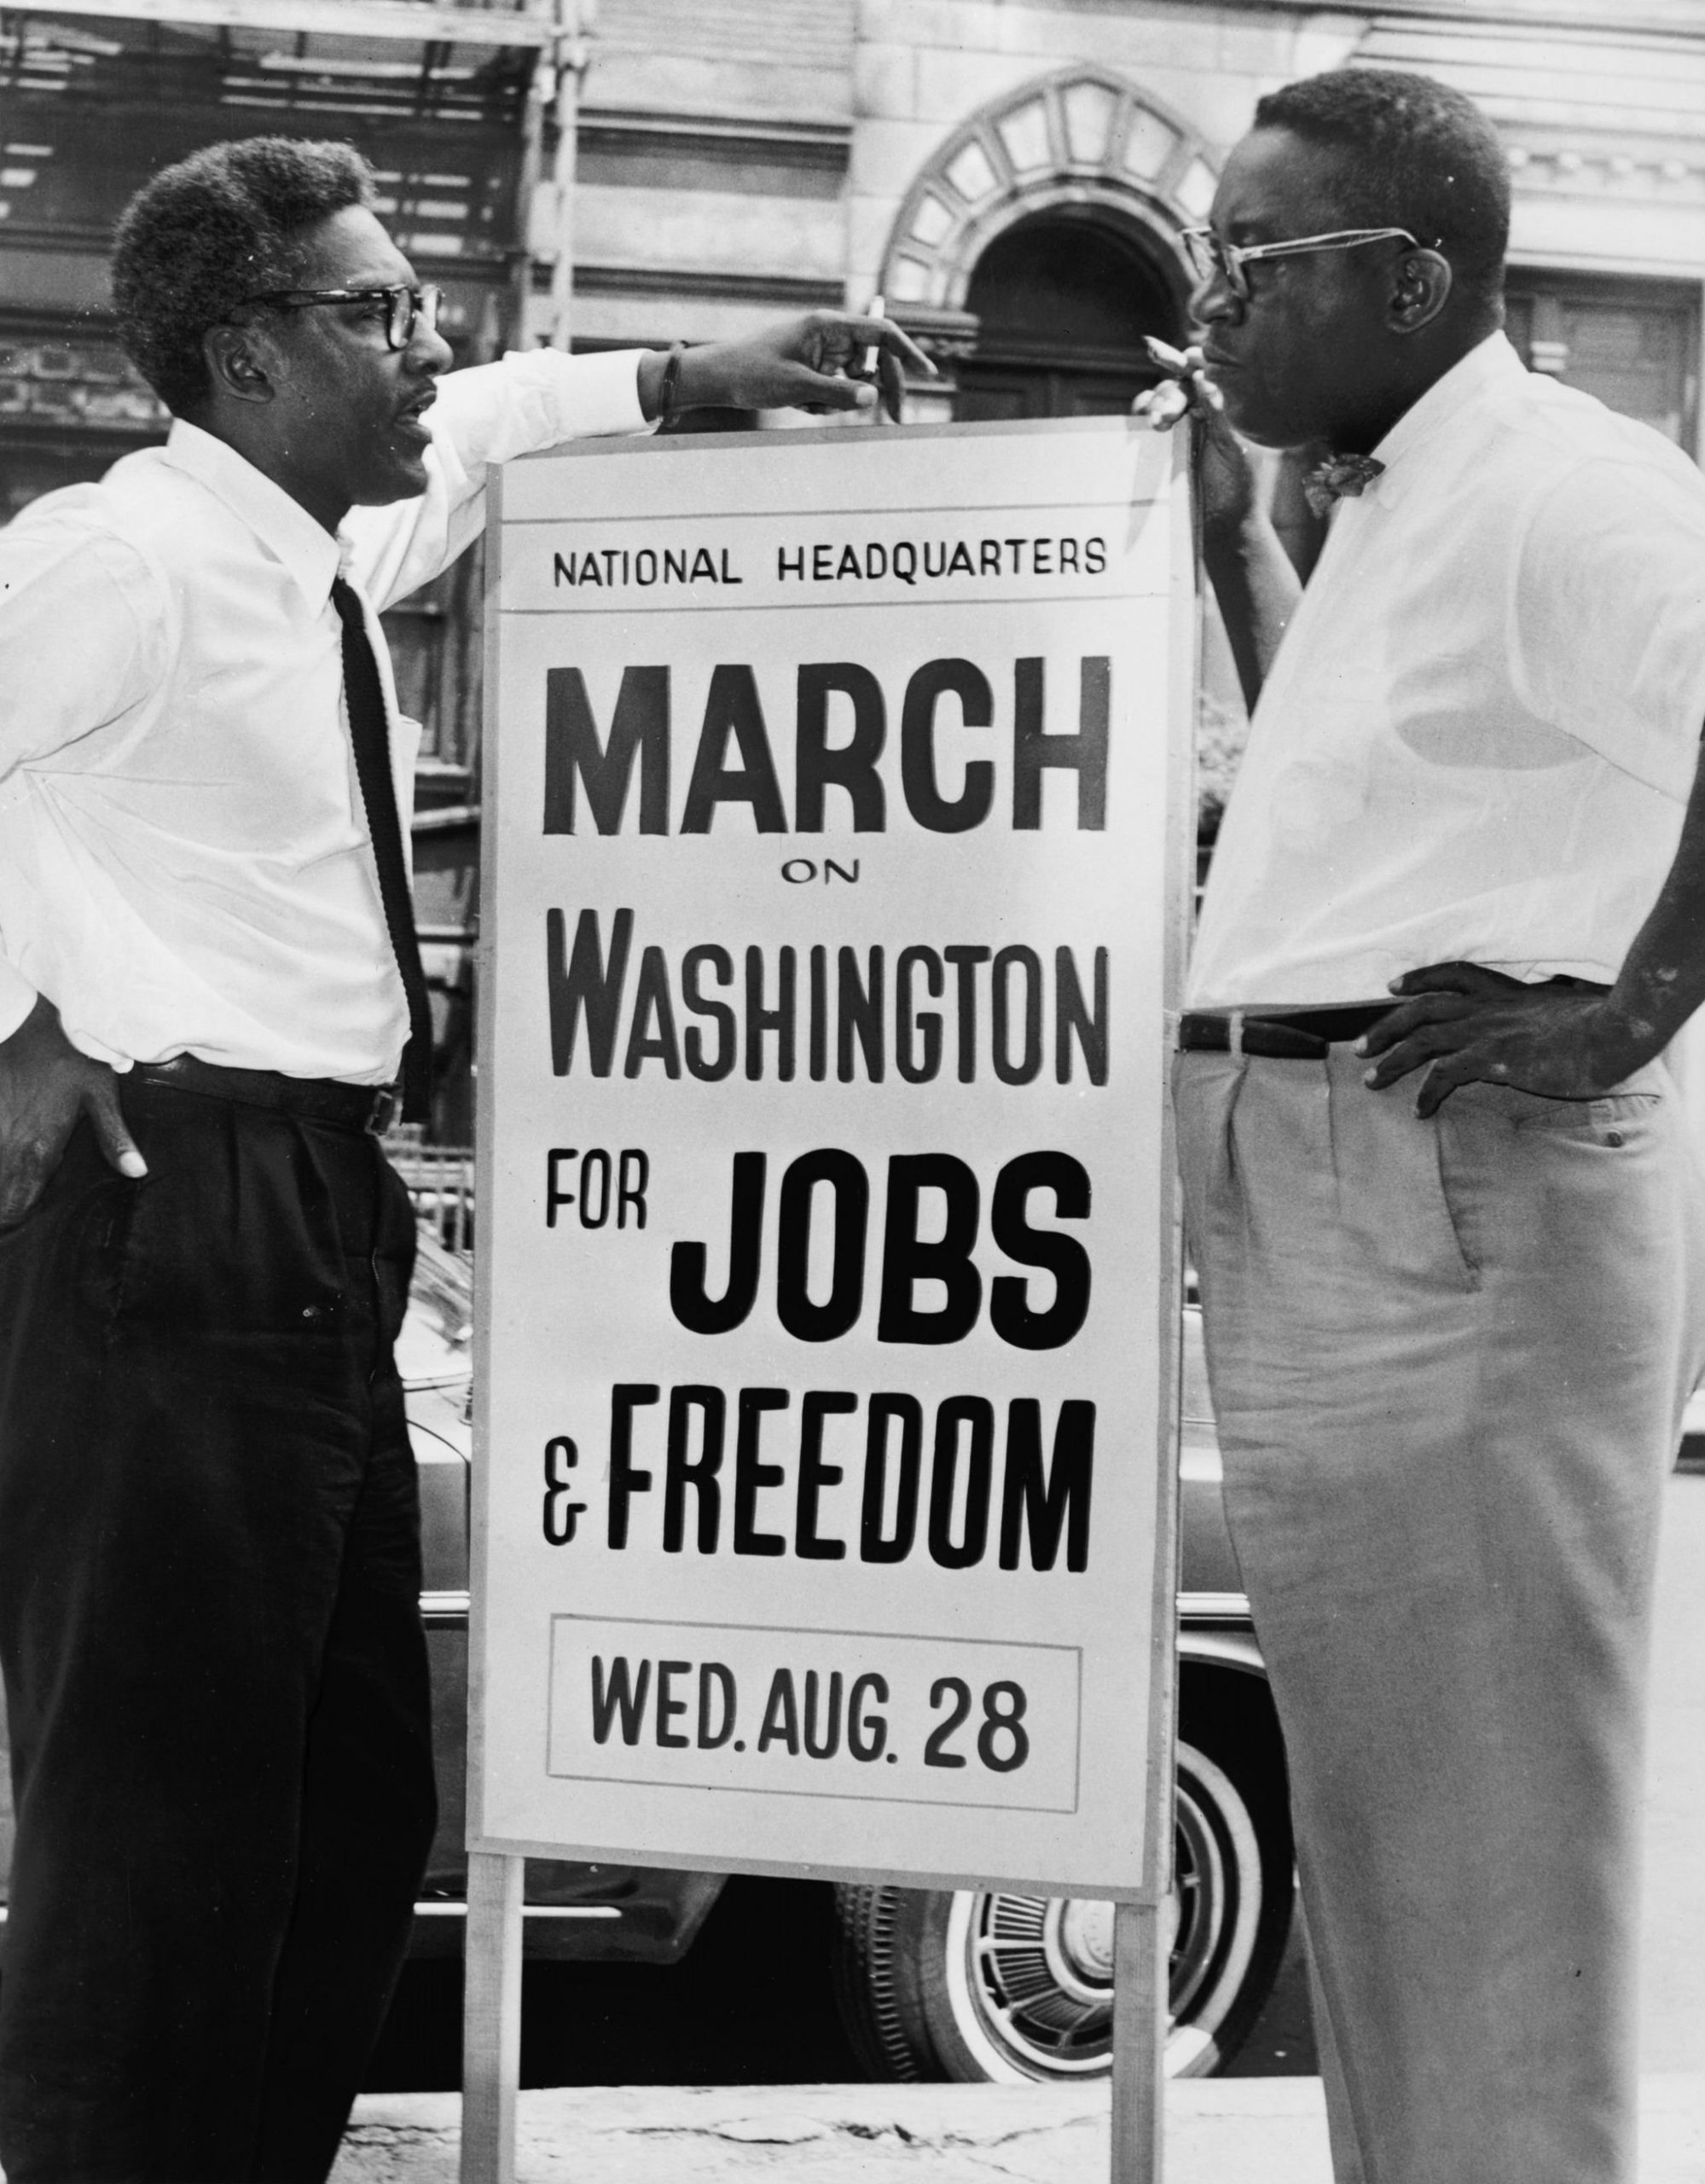 In front of 170 W. 130th Street, March on Washington, l to r, Bayard Rustin, Deputy Director, and Cleveland Robinson, Chairman of Administrative Committee. Photo credit: O. Fernandez/World Telegram & Sun